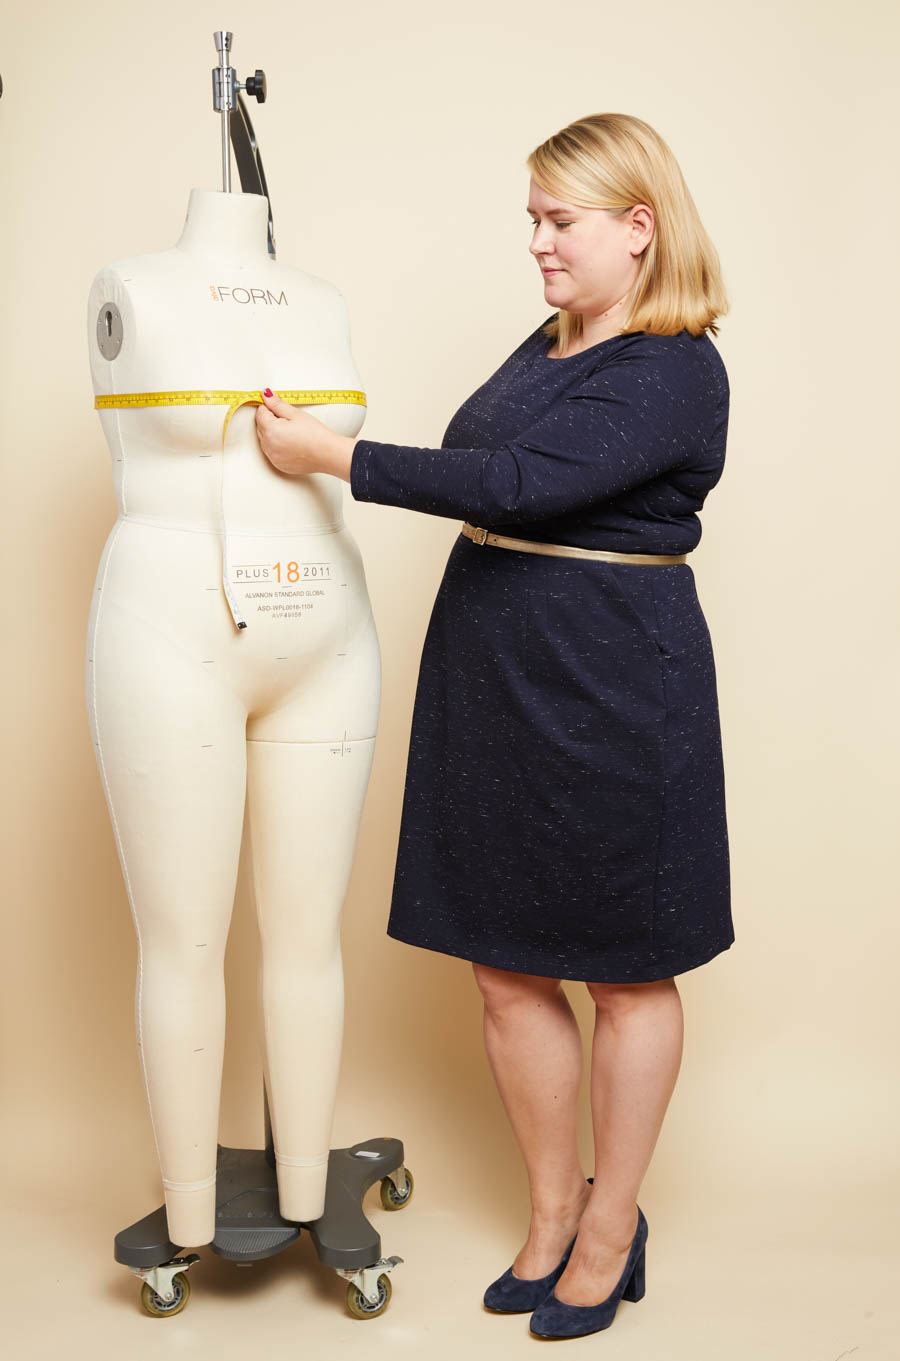 How to Get Your Accurate Body Measurements for Clothing Sizes - dummies